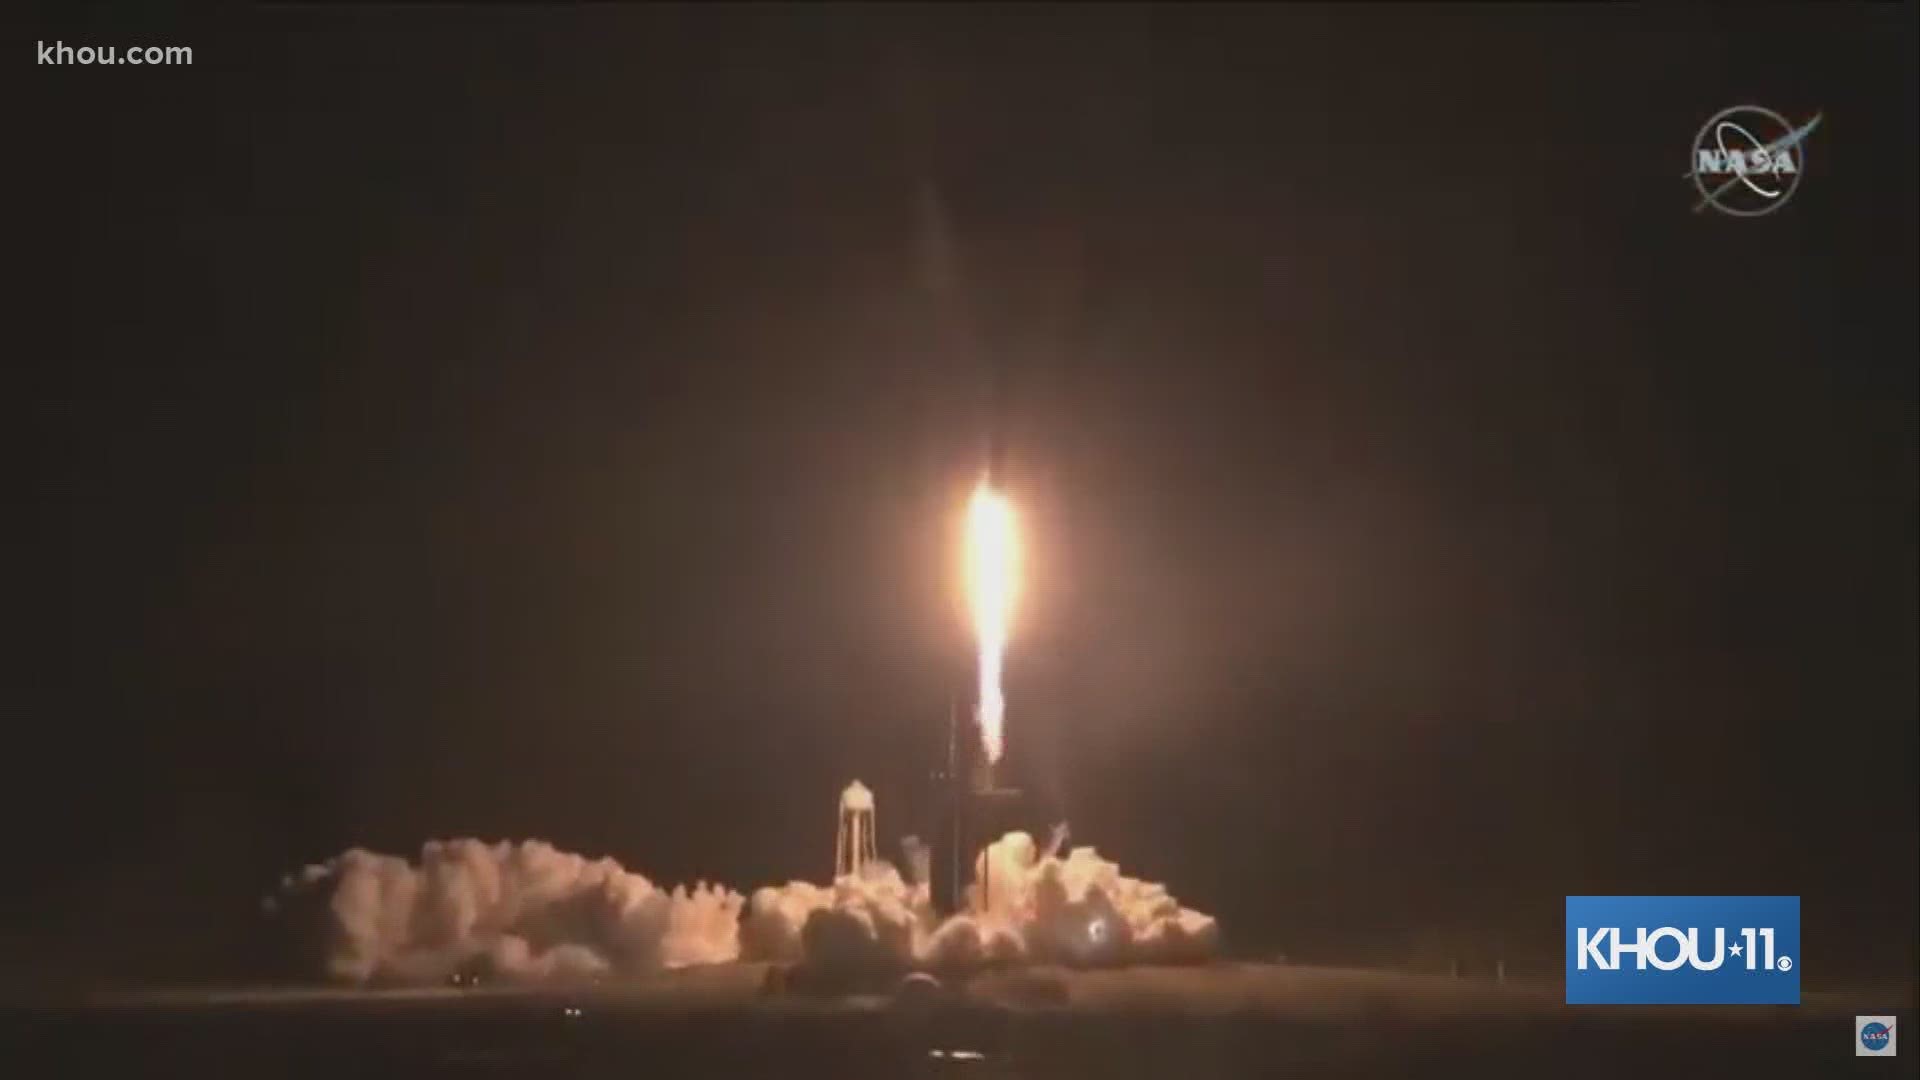 'Not even gravity contains humanity when we explore as one for all' as Dragon lifts off from Cape Canaveral to the International Space Station.